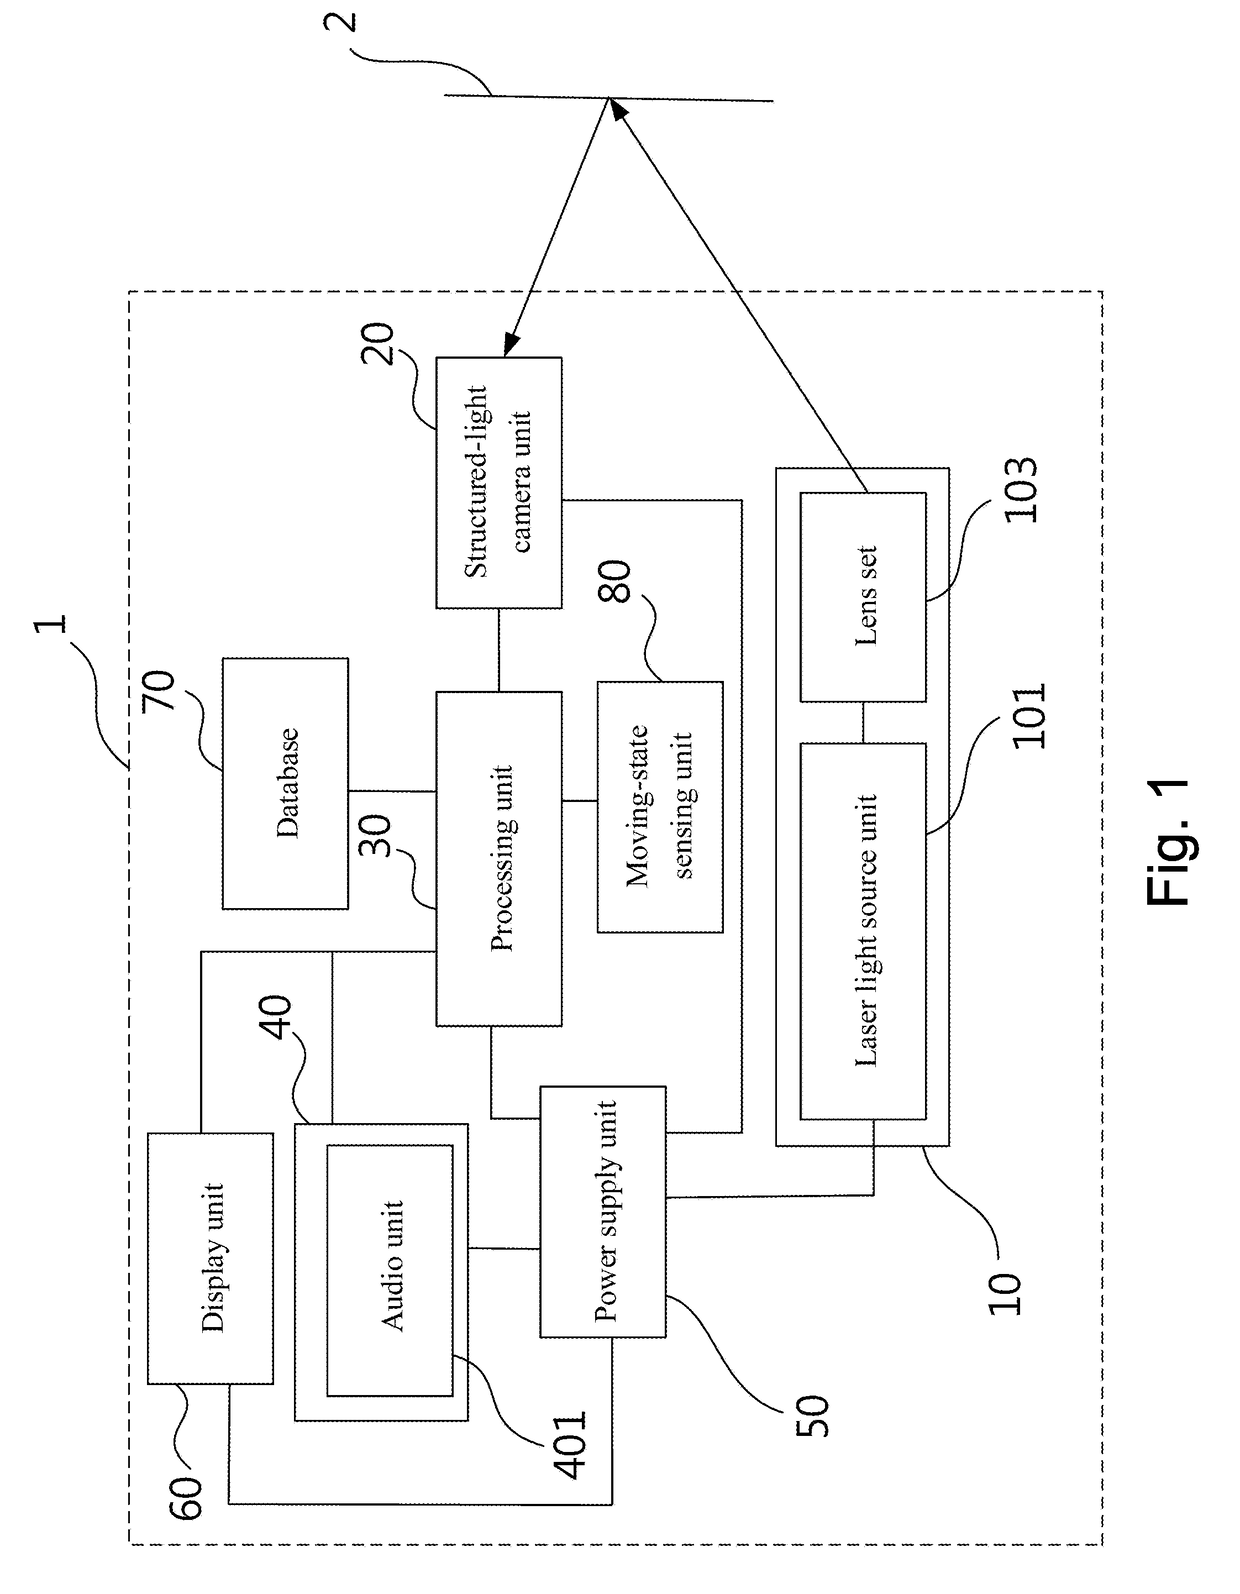 Alarm method for reversing a vehicle by sensing obstacles using structured light